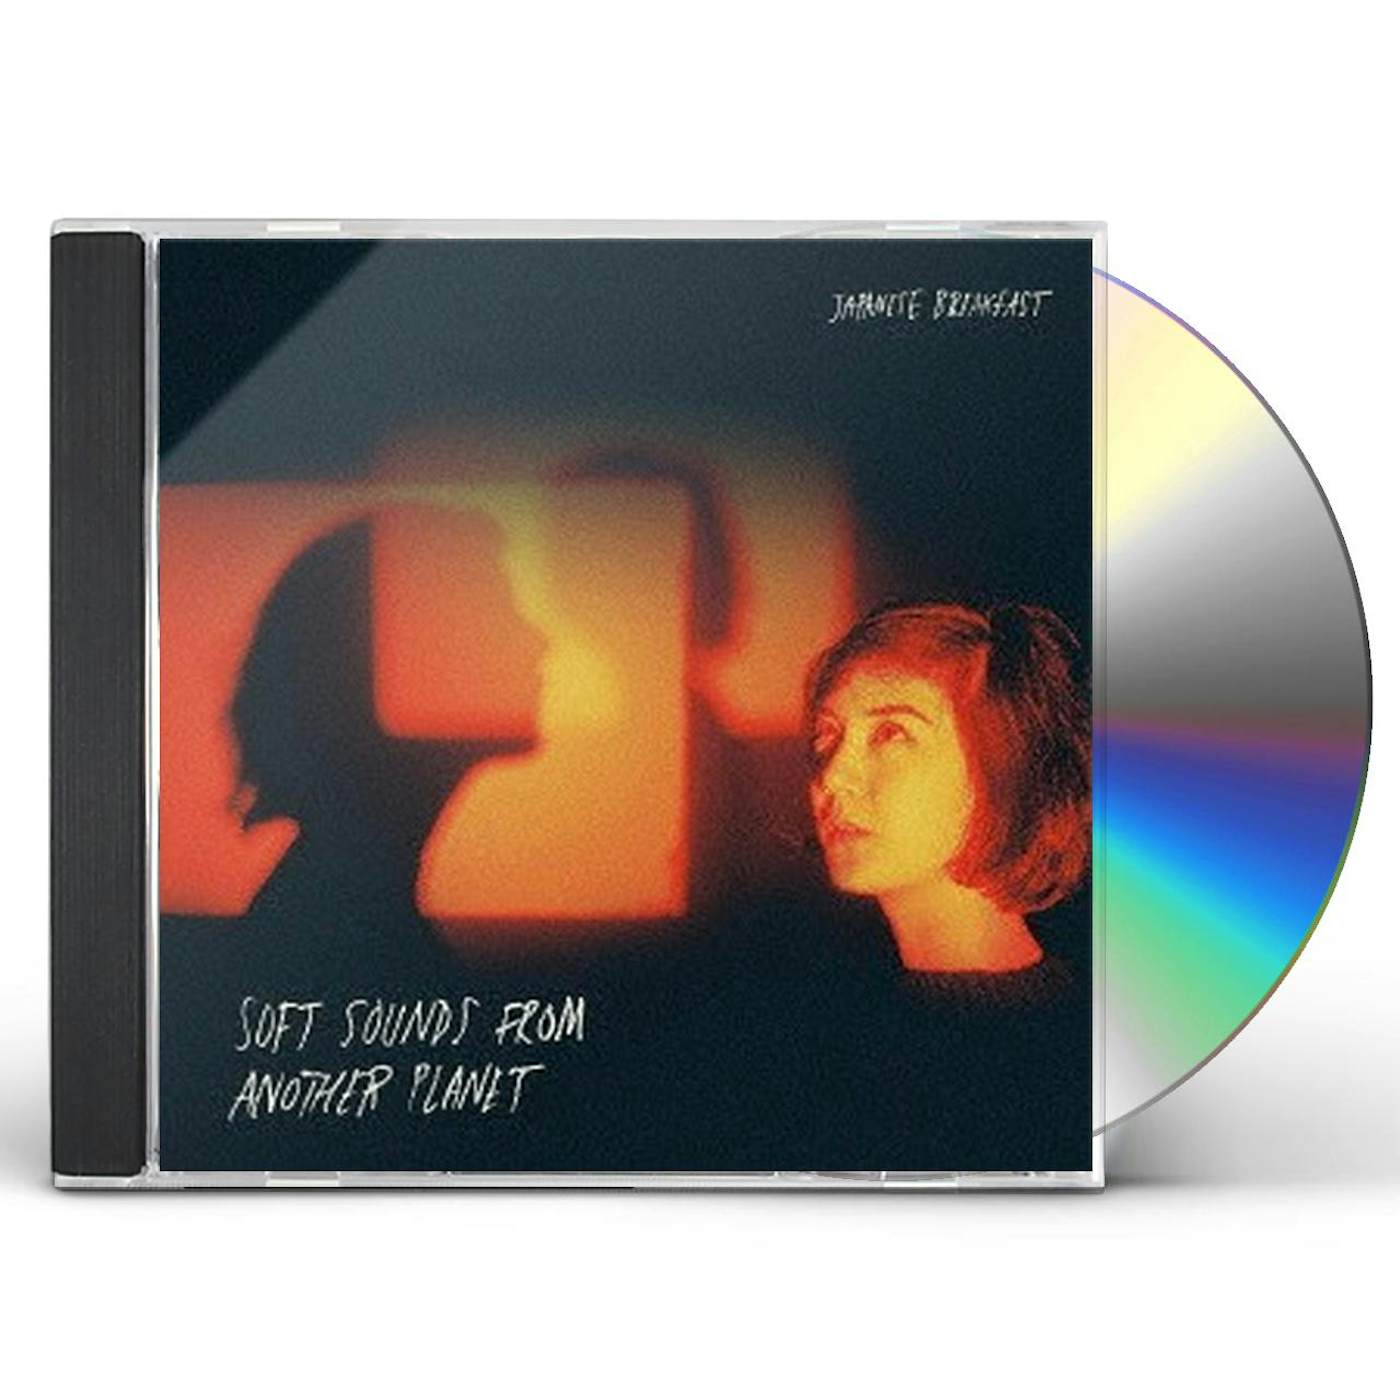 Japanese Breakfast SOFT SOUNDS FROM ANOTHER PLANET (BONUS TRACK) CD